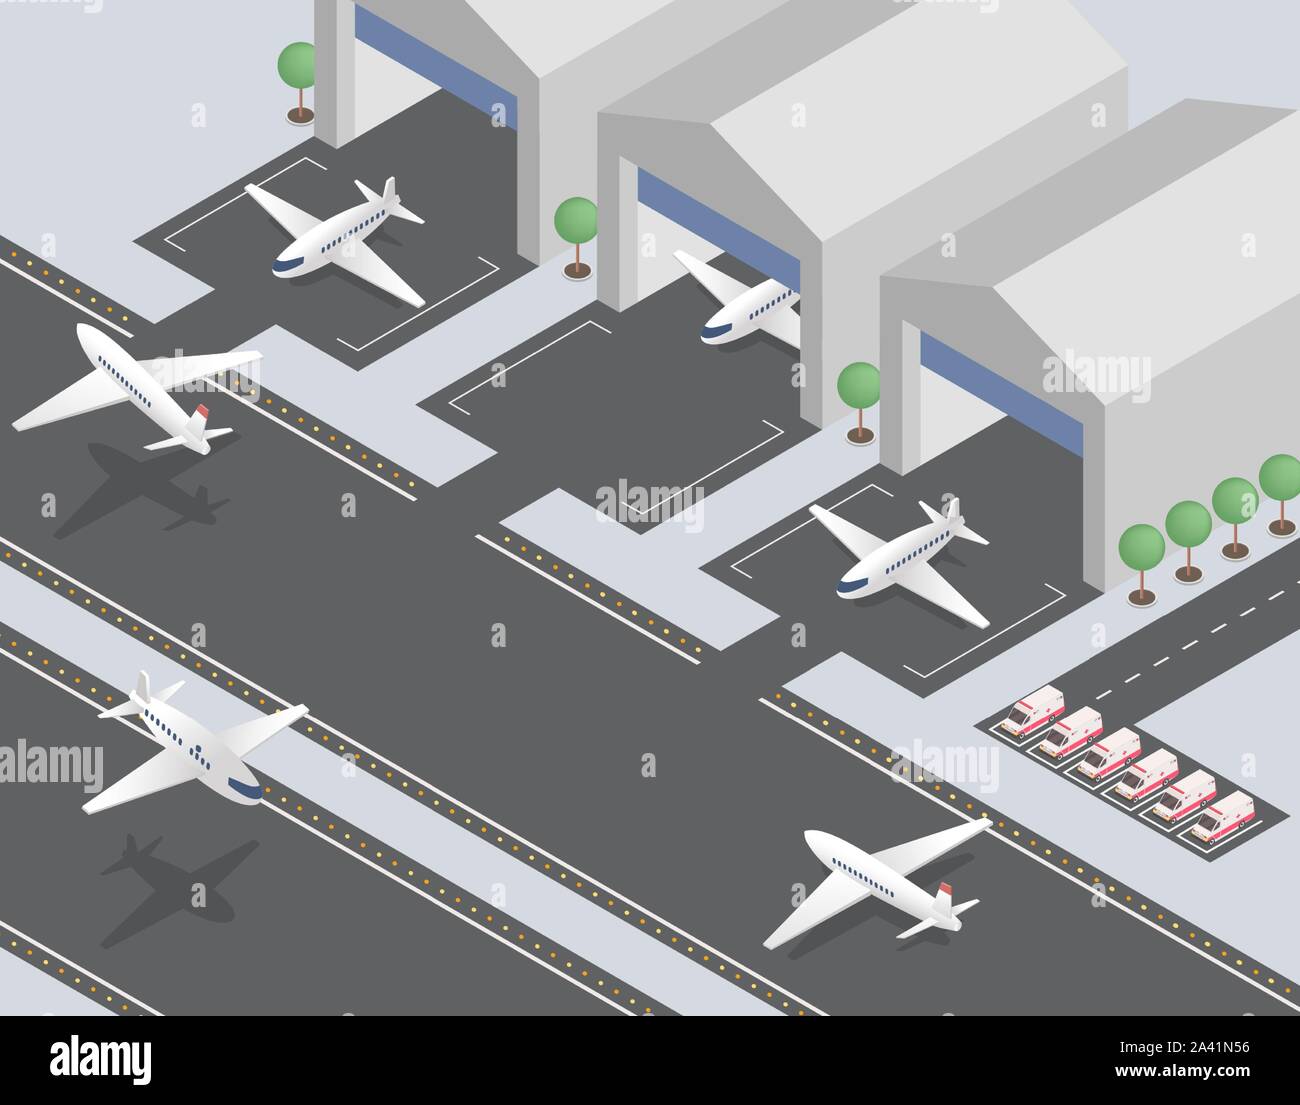 Departing, arriving planes isometric vector illustration. Civil aviation, passenger transportation business, commercial airline. Modern airfield, airport runway with aircrafts and ambulance cars Stock Vector